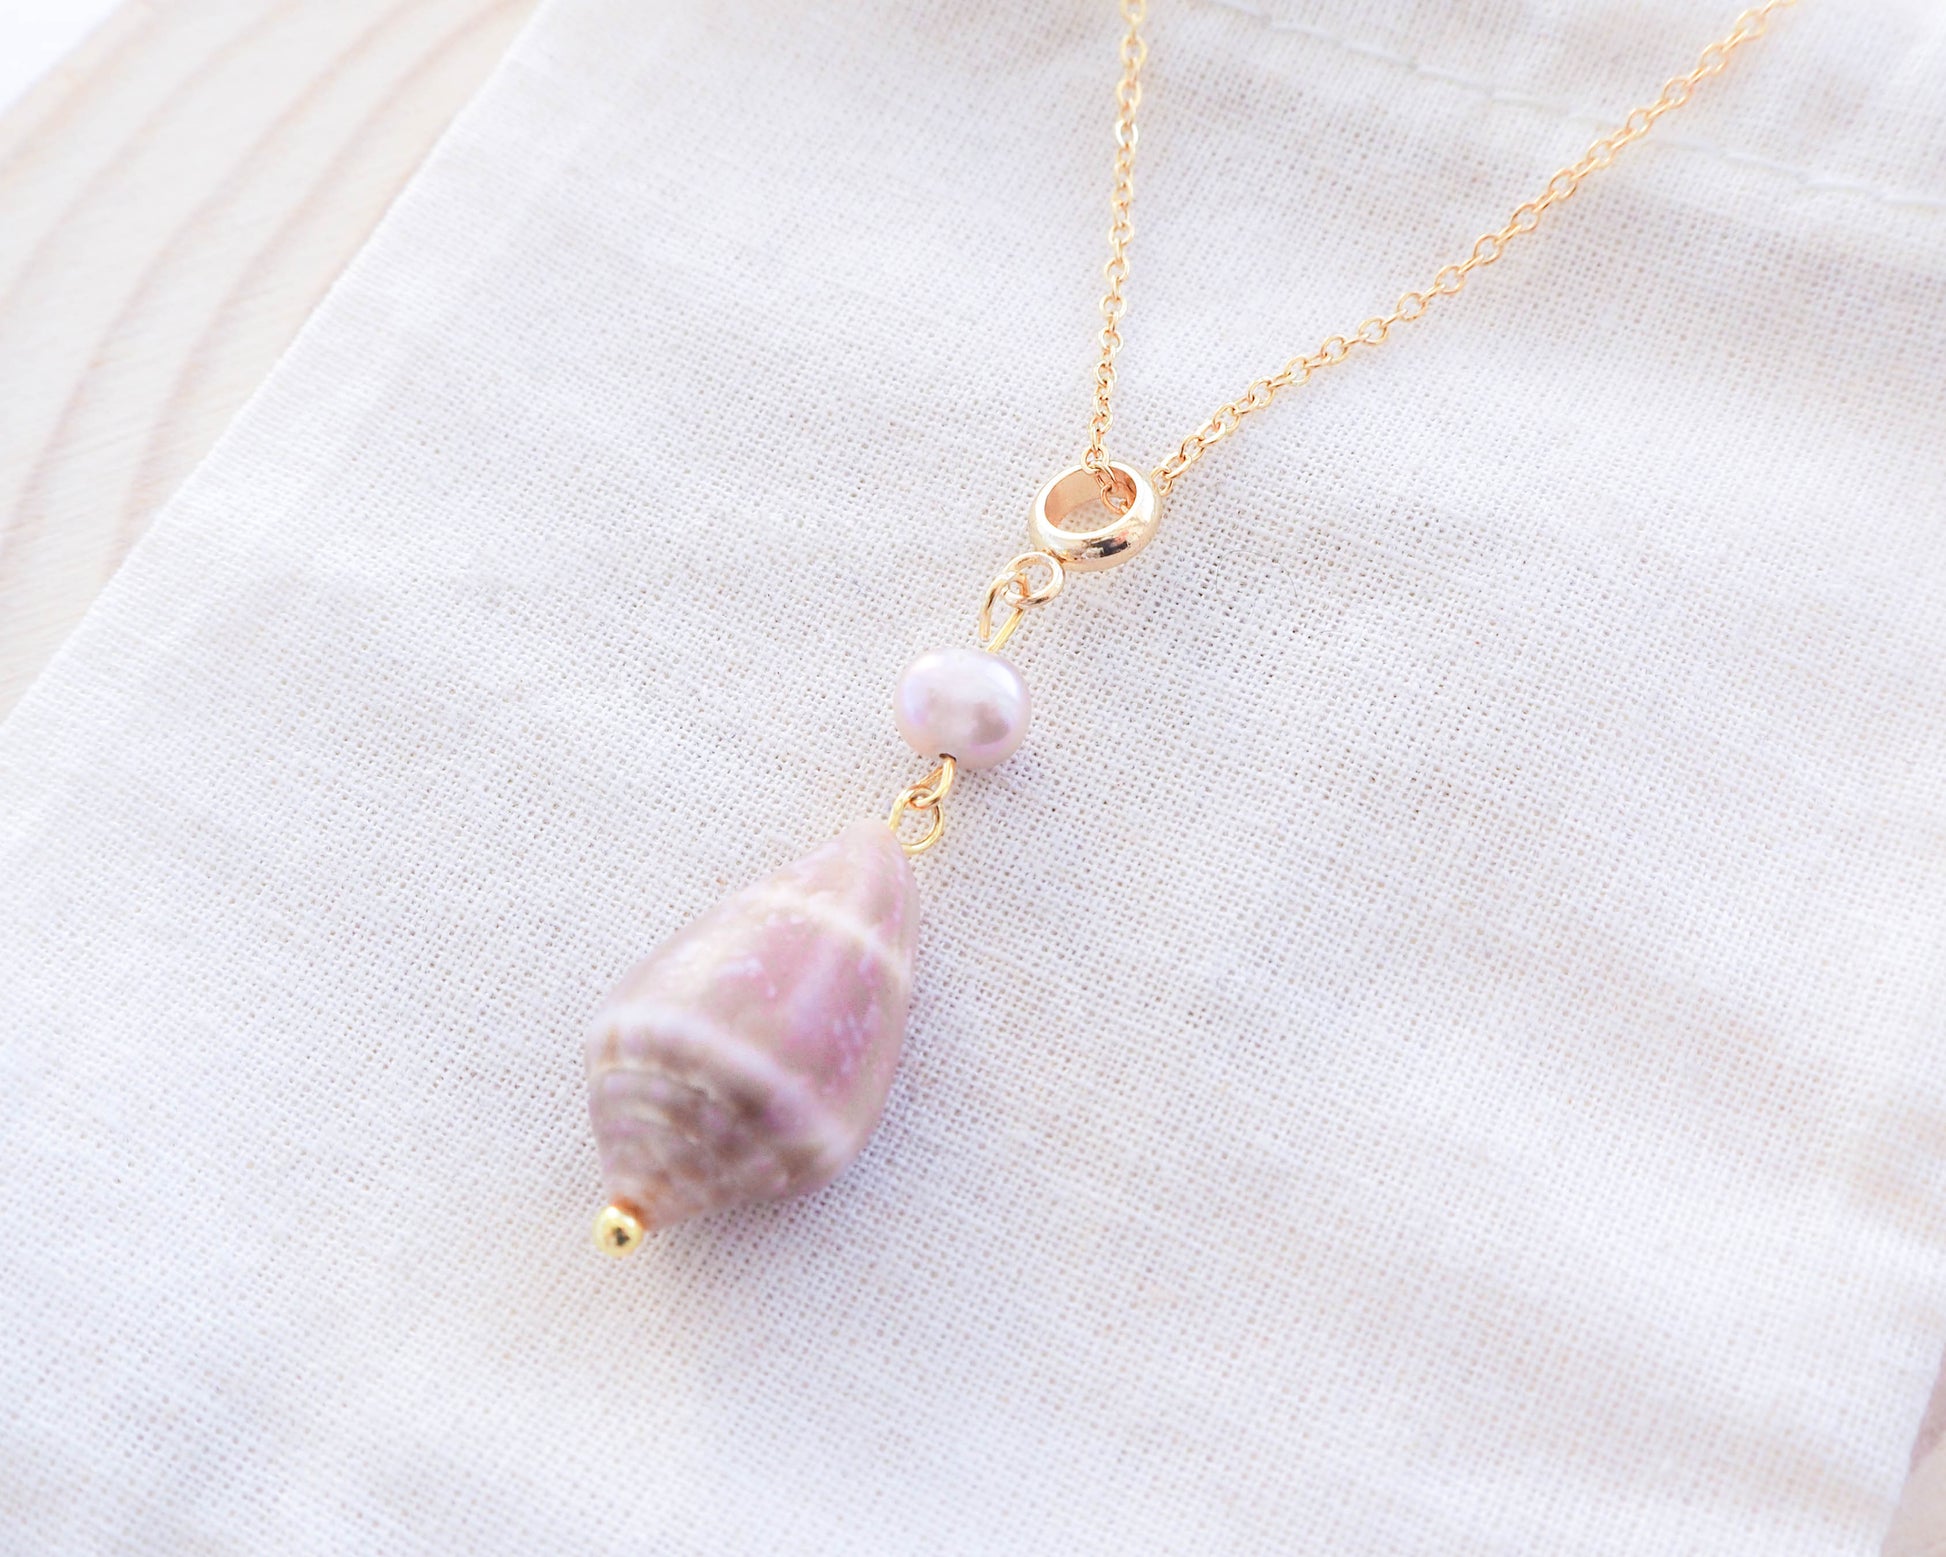 Close-up of Pendant: Freshwater Pearl and Cone Shell on Gold Stainless Steel Necklace